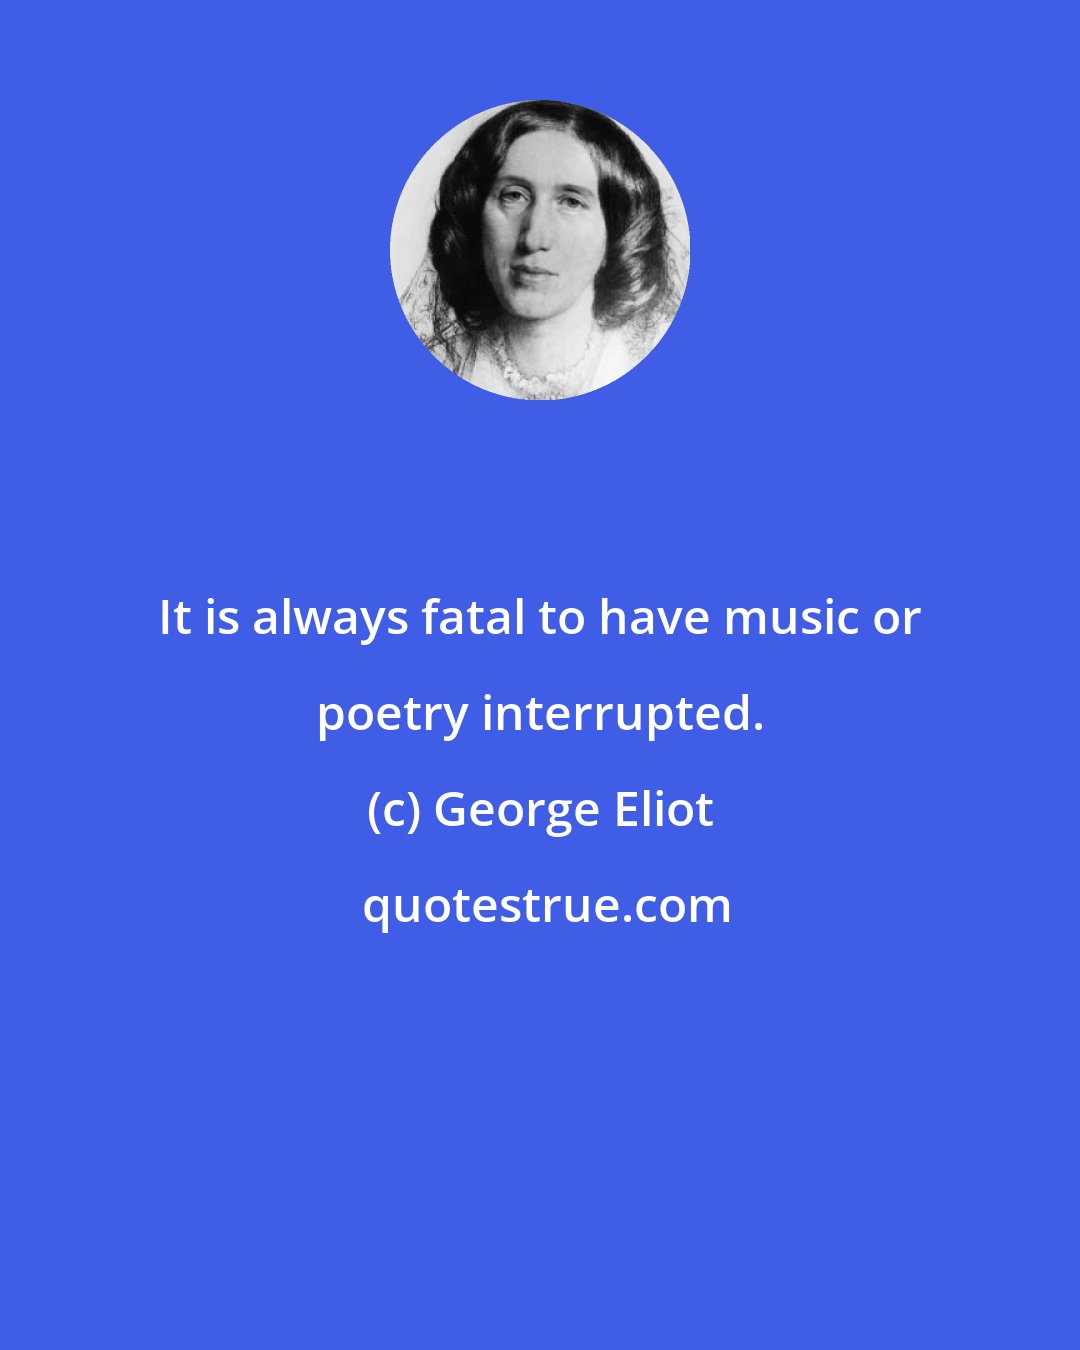 George Eliot: It is always fatal to have music or poetry interrupted.